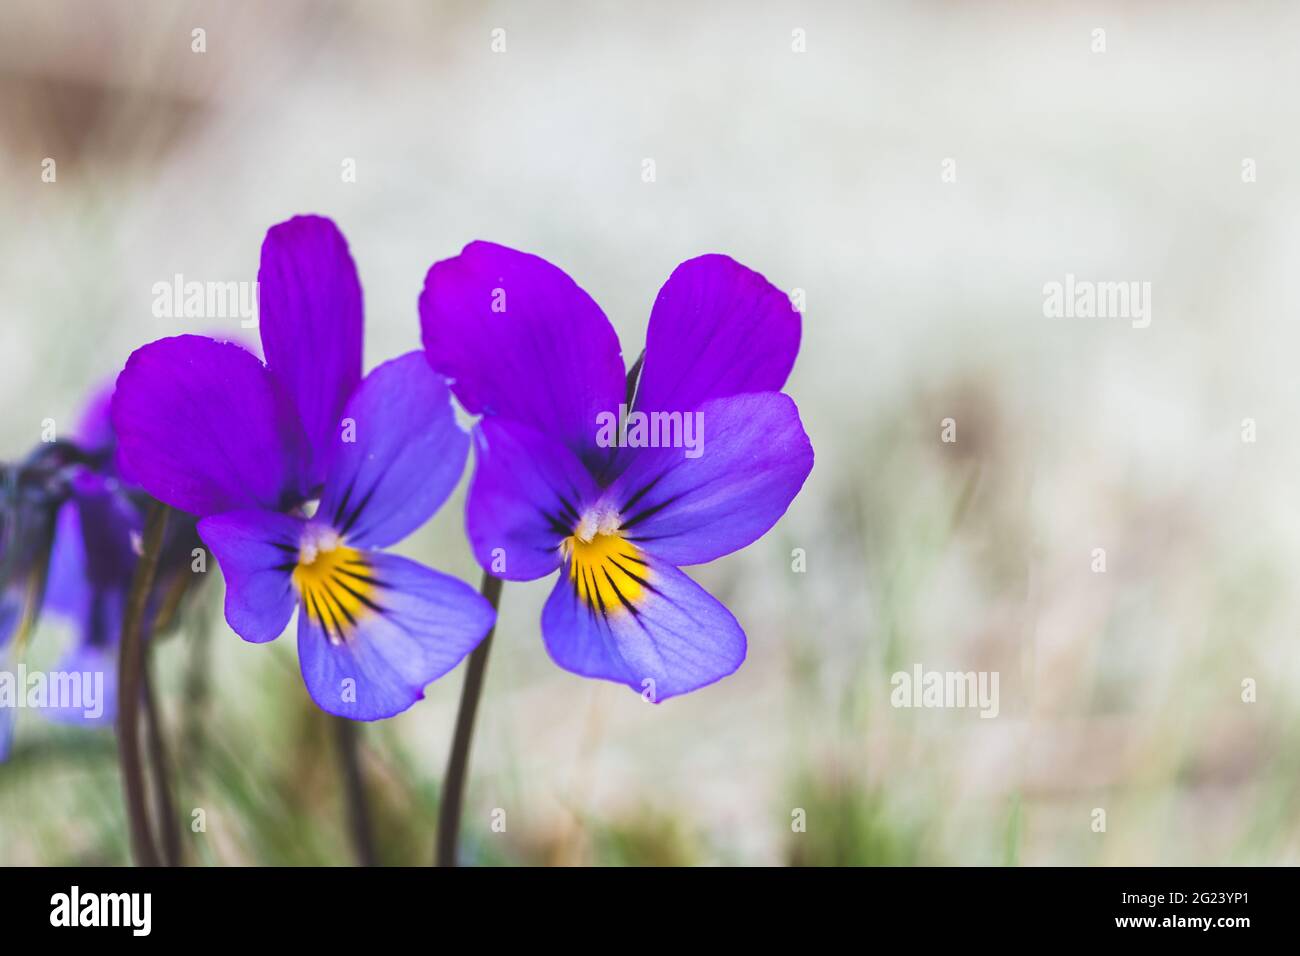 Flowers of Viola tricolor among white moss in the sand, close up. Wild pansy, Johnny Jump up, heartsease, heart's ease, heart's delight, European wild Stock Photo